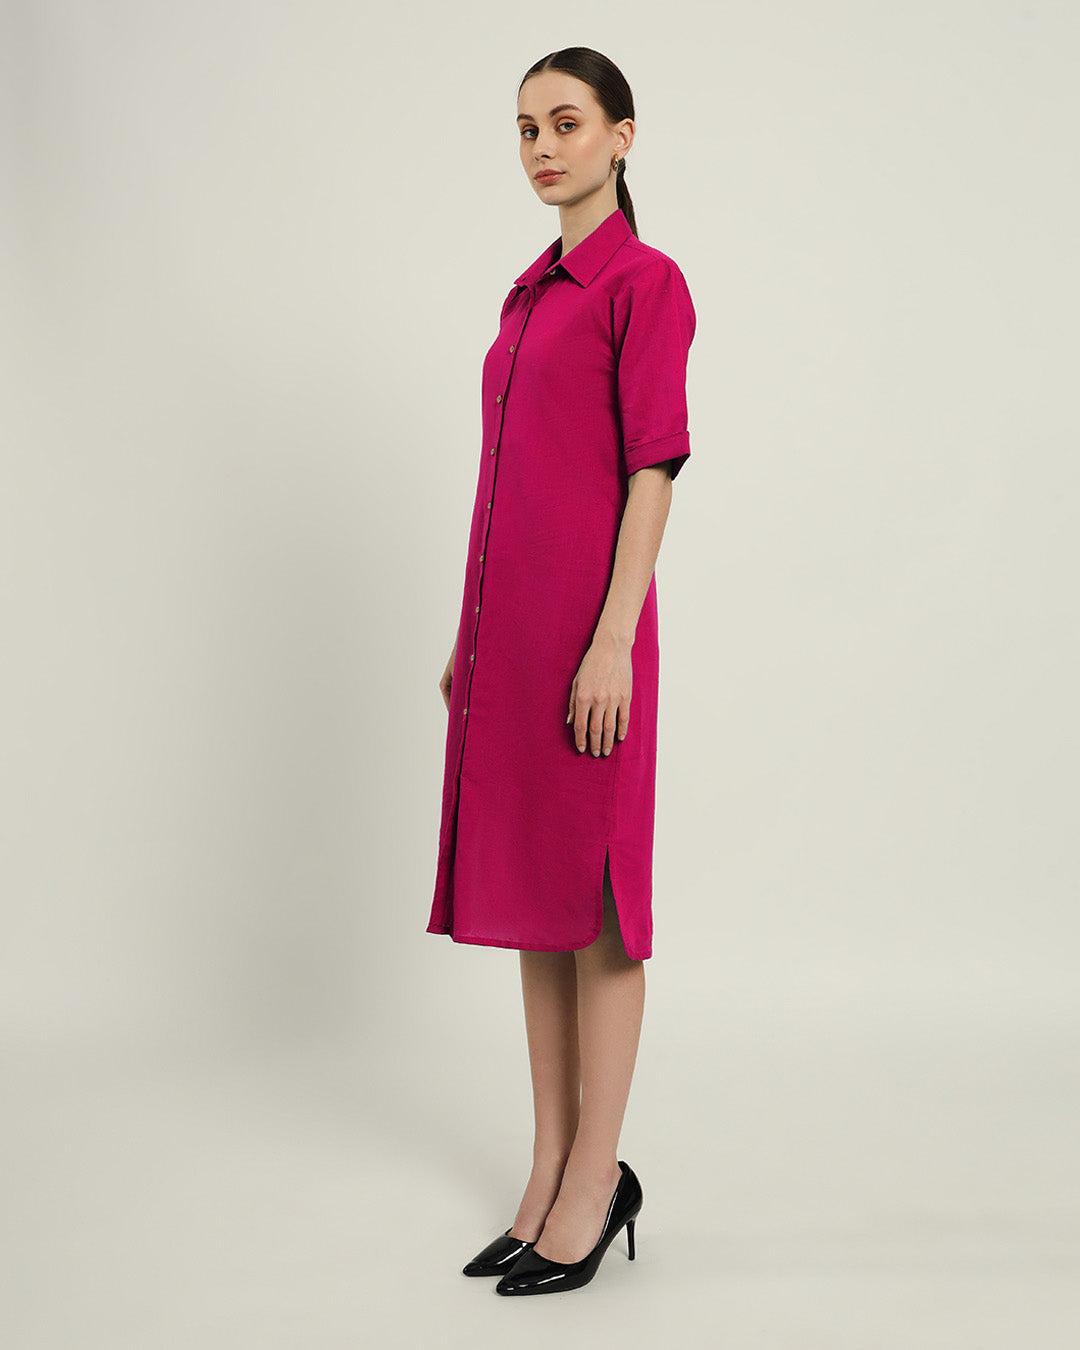 The Tampa Berry Cotton Dress